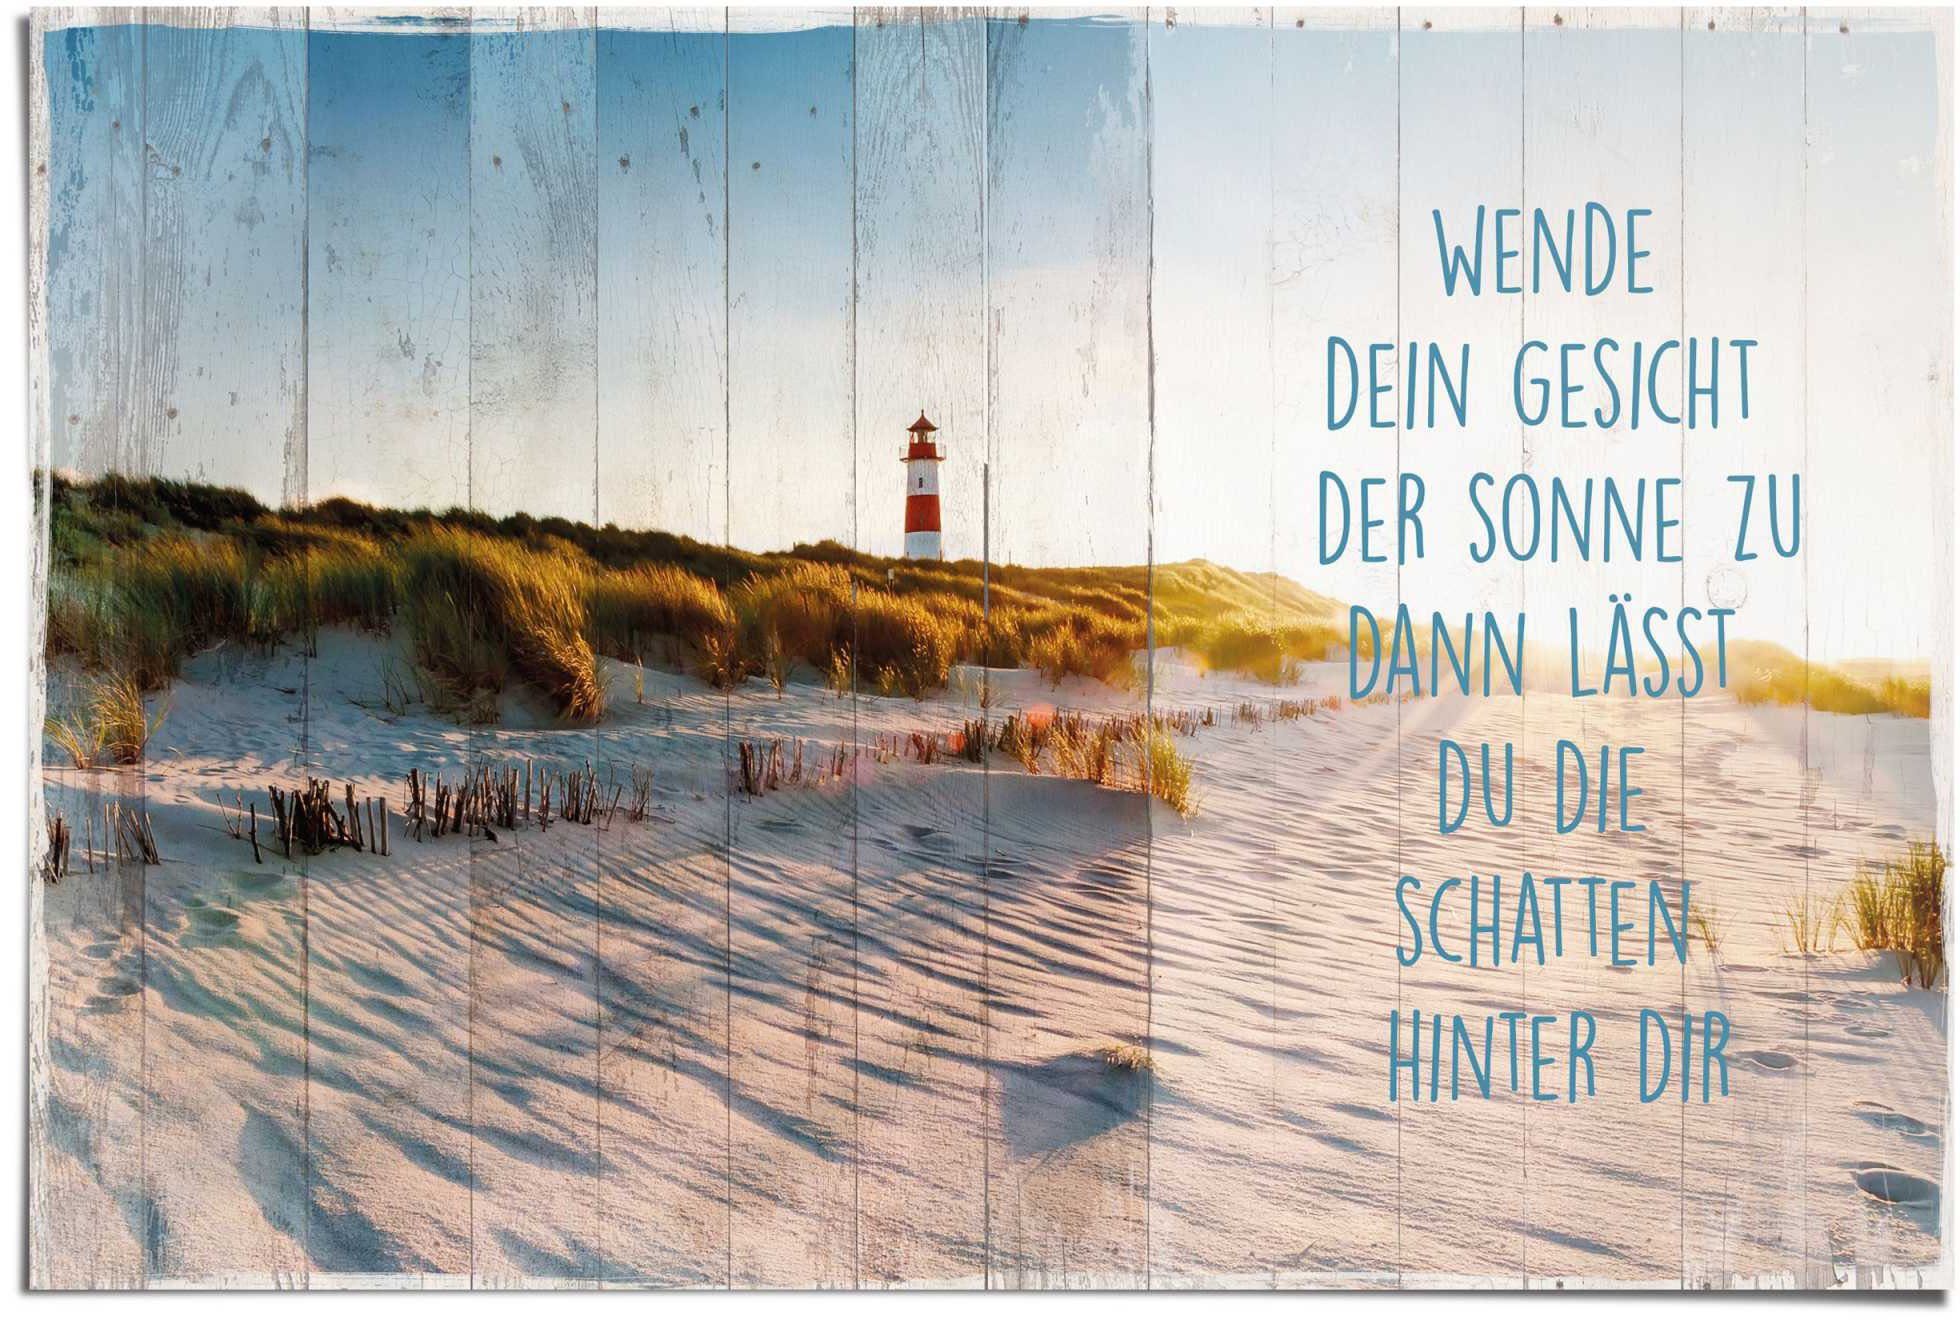 Strand, Reinders! Poster (1 Sonne St) am